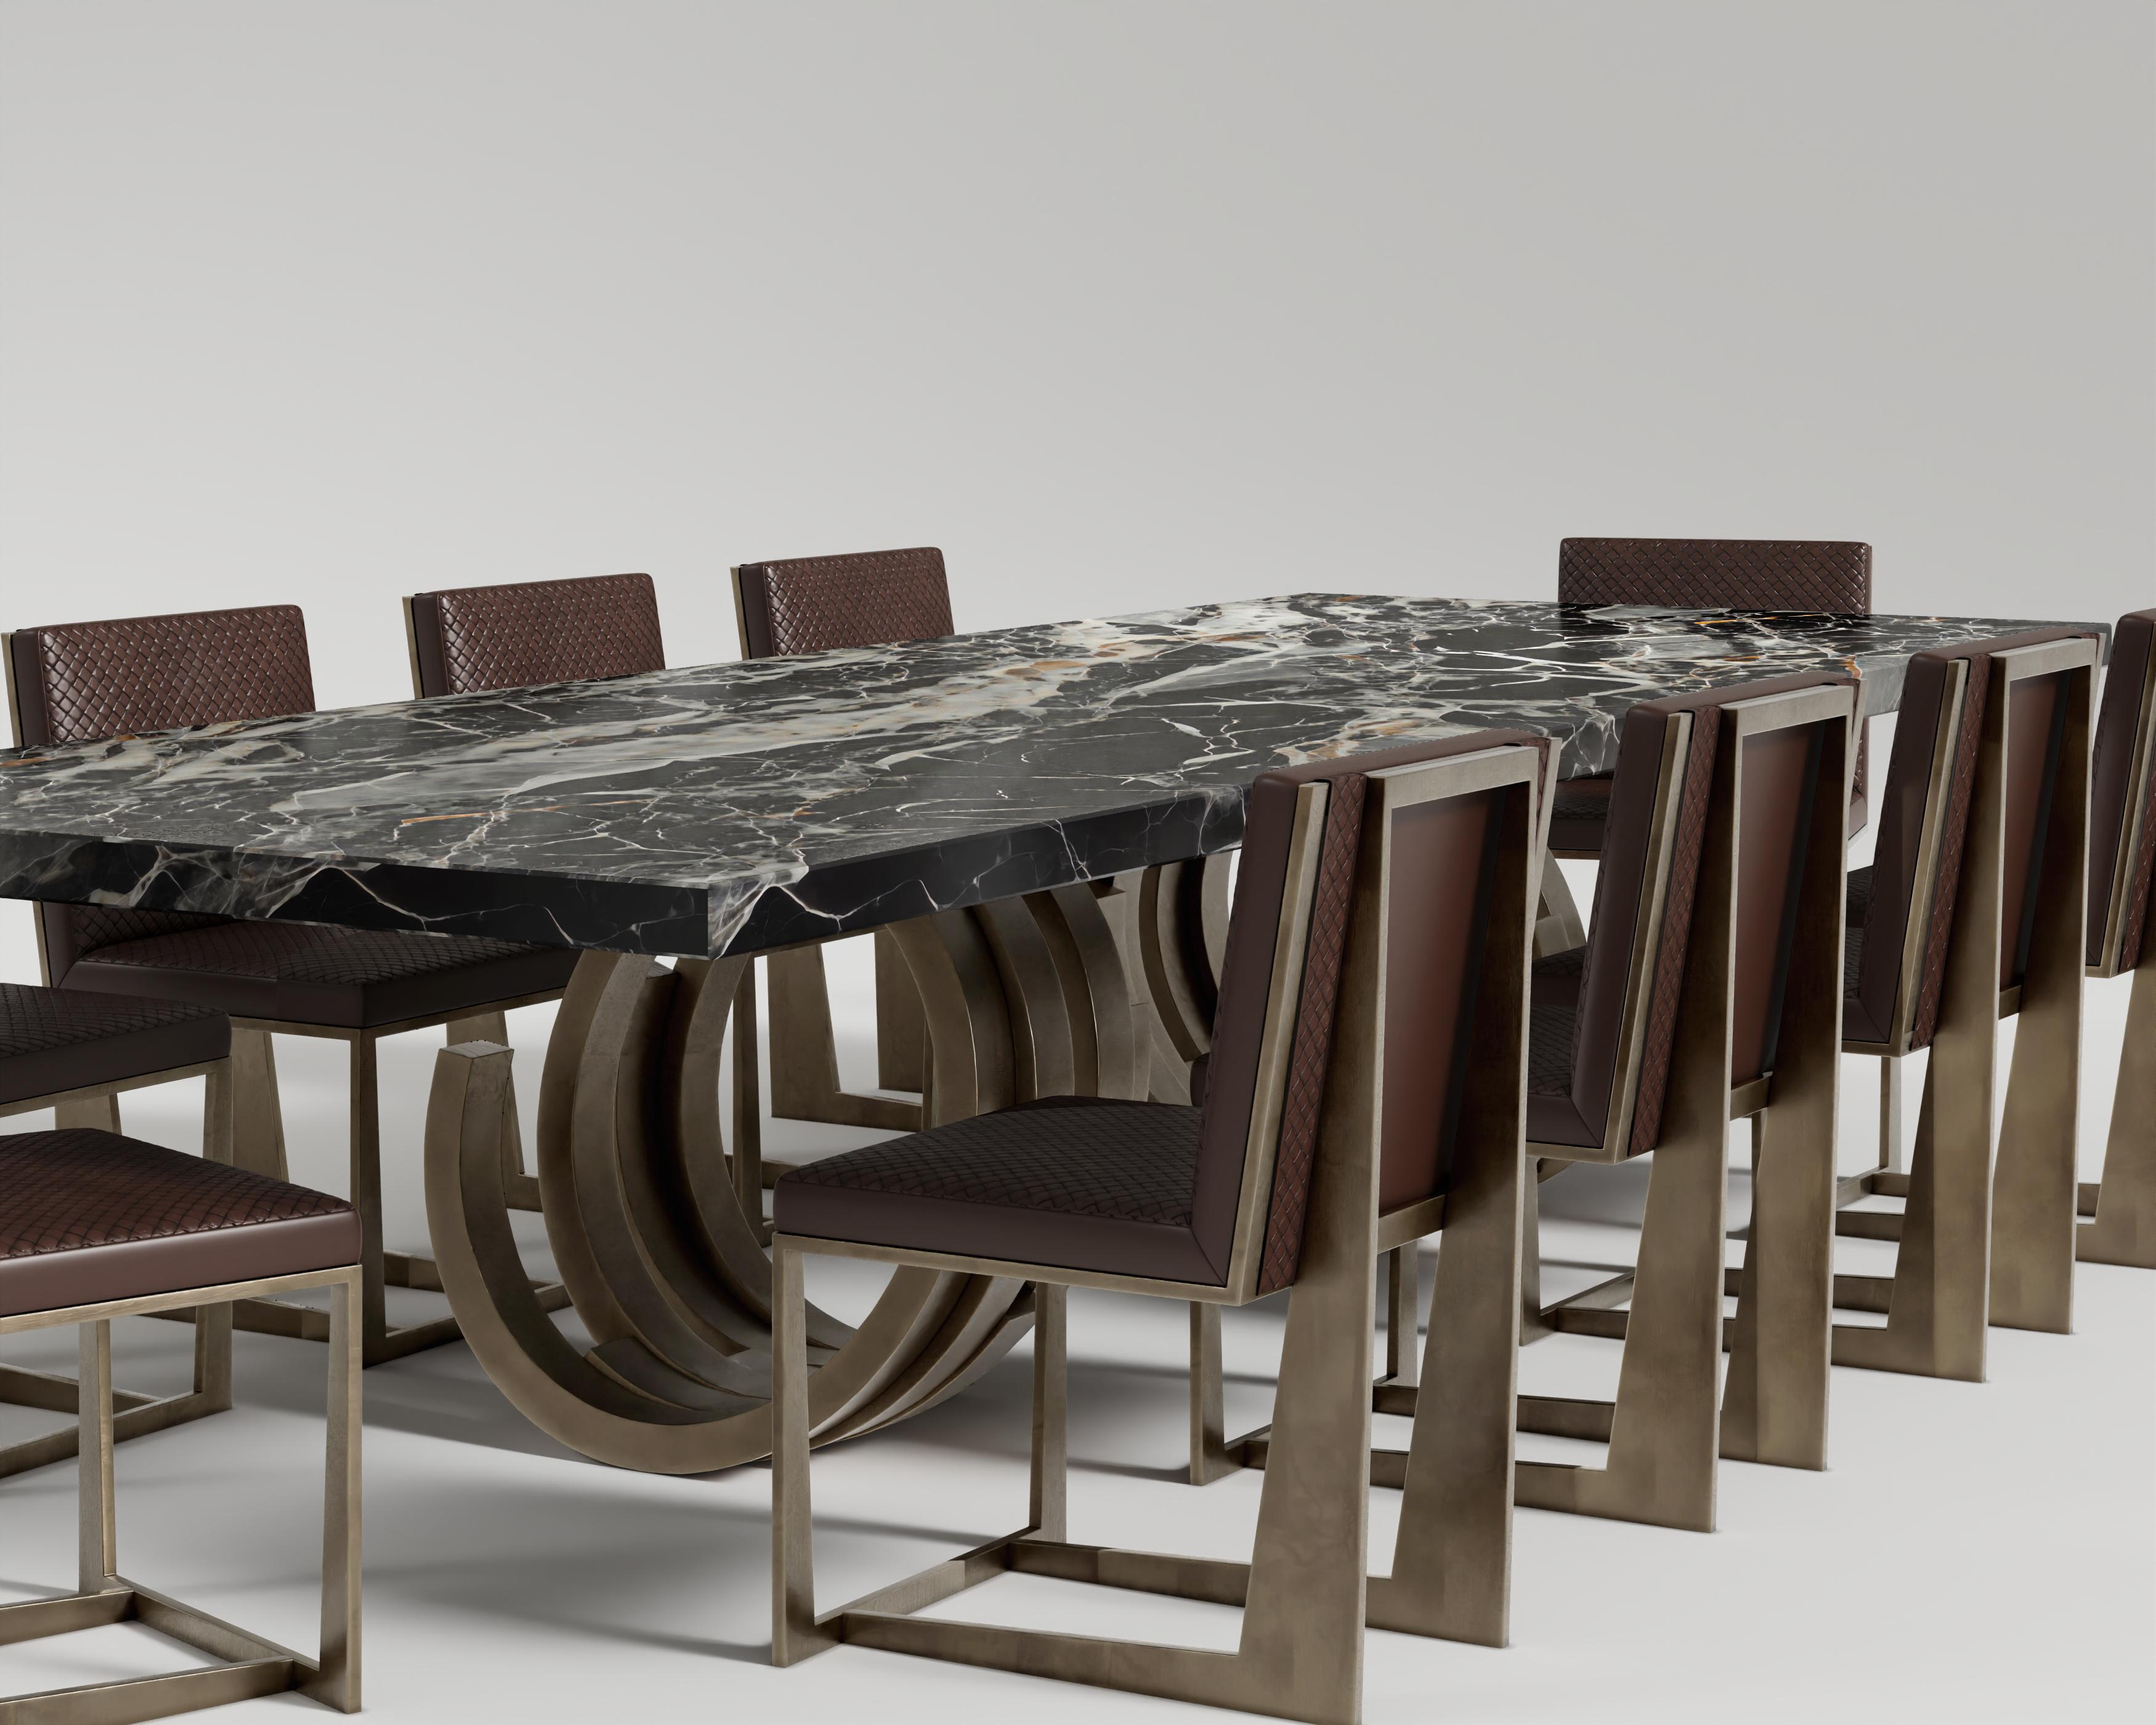 Turkish Oculus Dining Table & 10 Affilato Chairs Dining Room Set For Sale